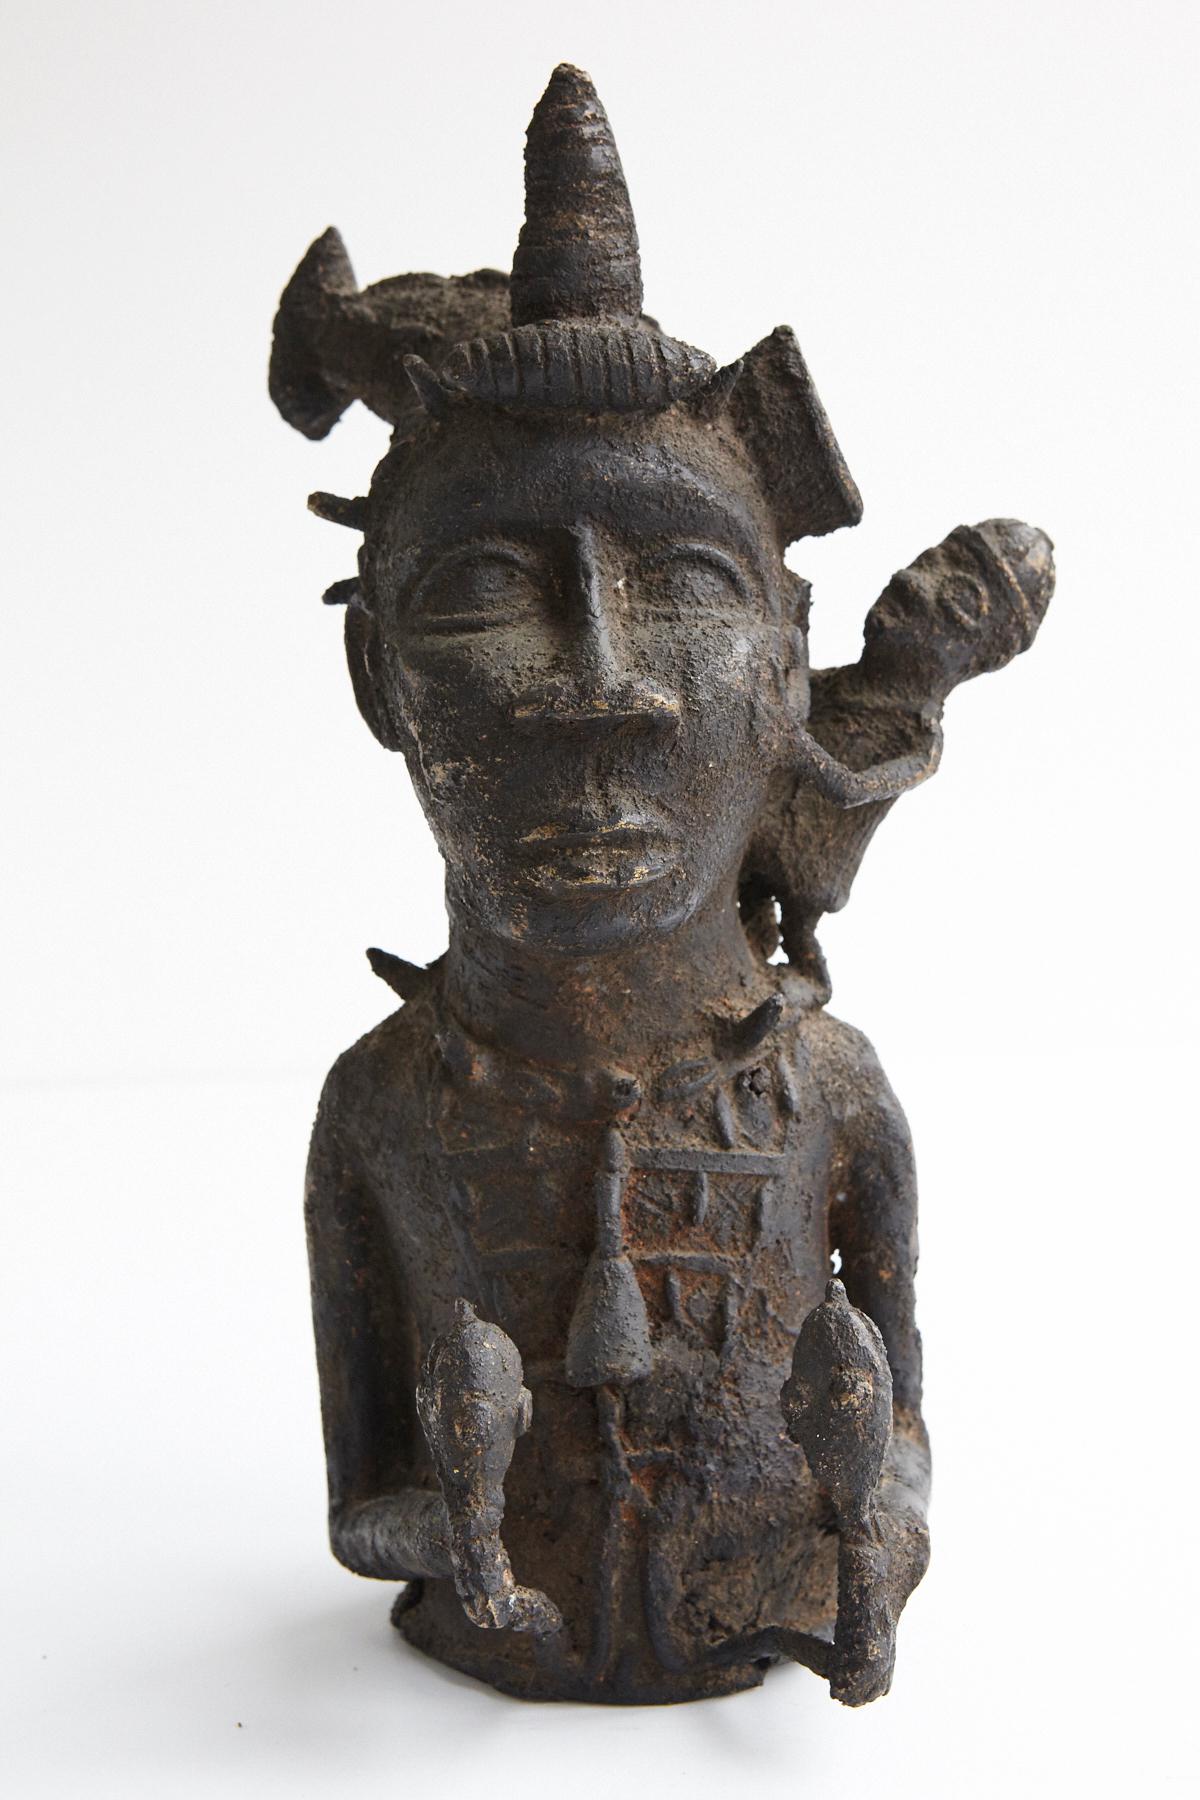 Statues of Juju Man or shamans were used for ceremonies connected with religious beliefs and magical practices. The general understanding of their meaning as including a supernatural or magical power of bringing good to the owner or worshipper and